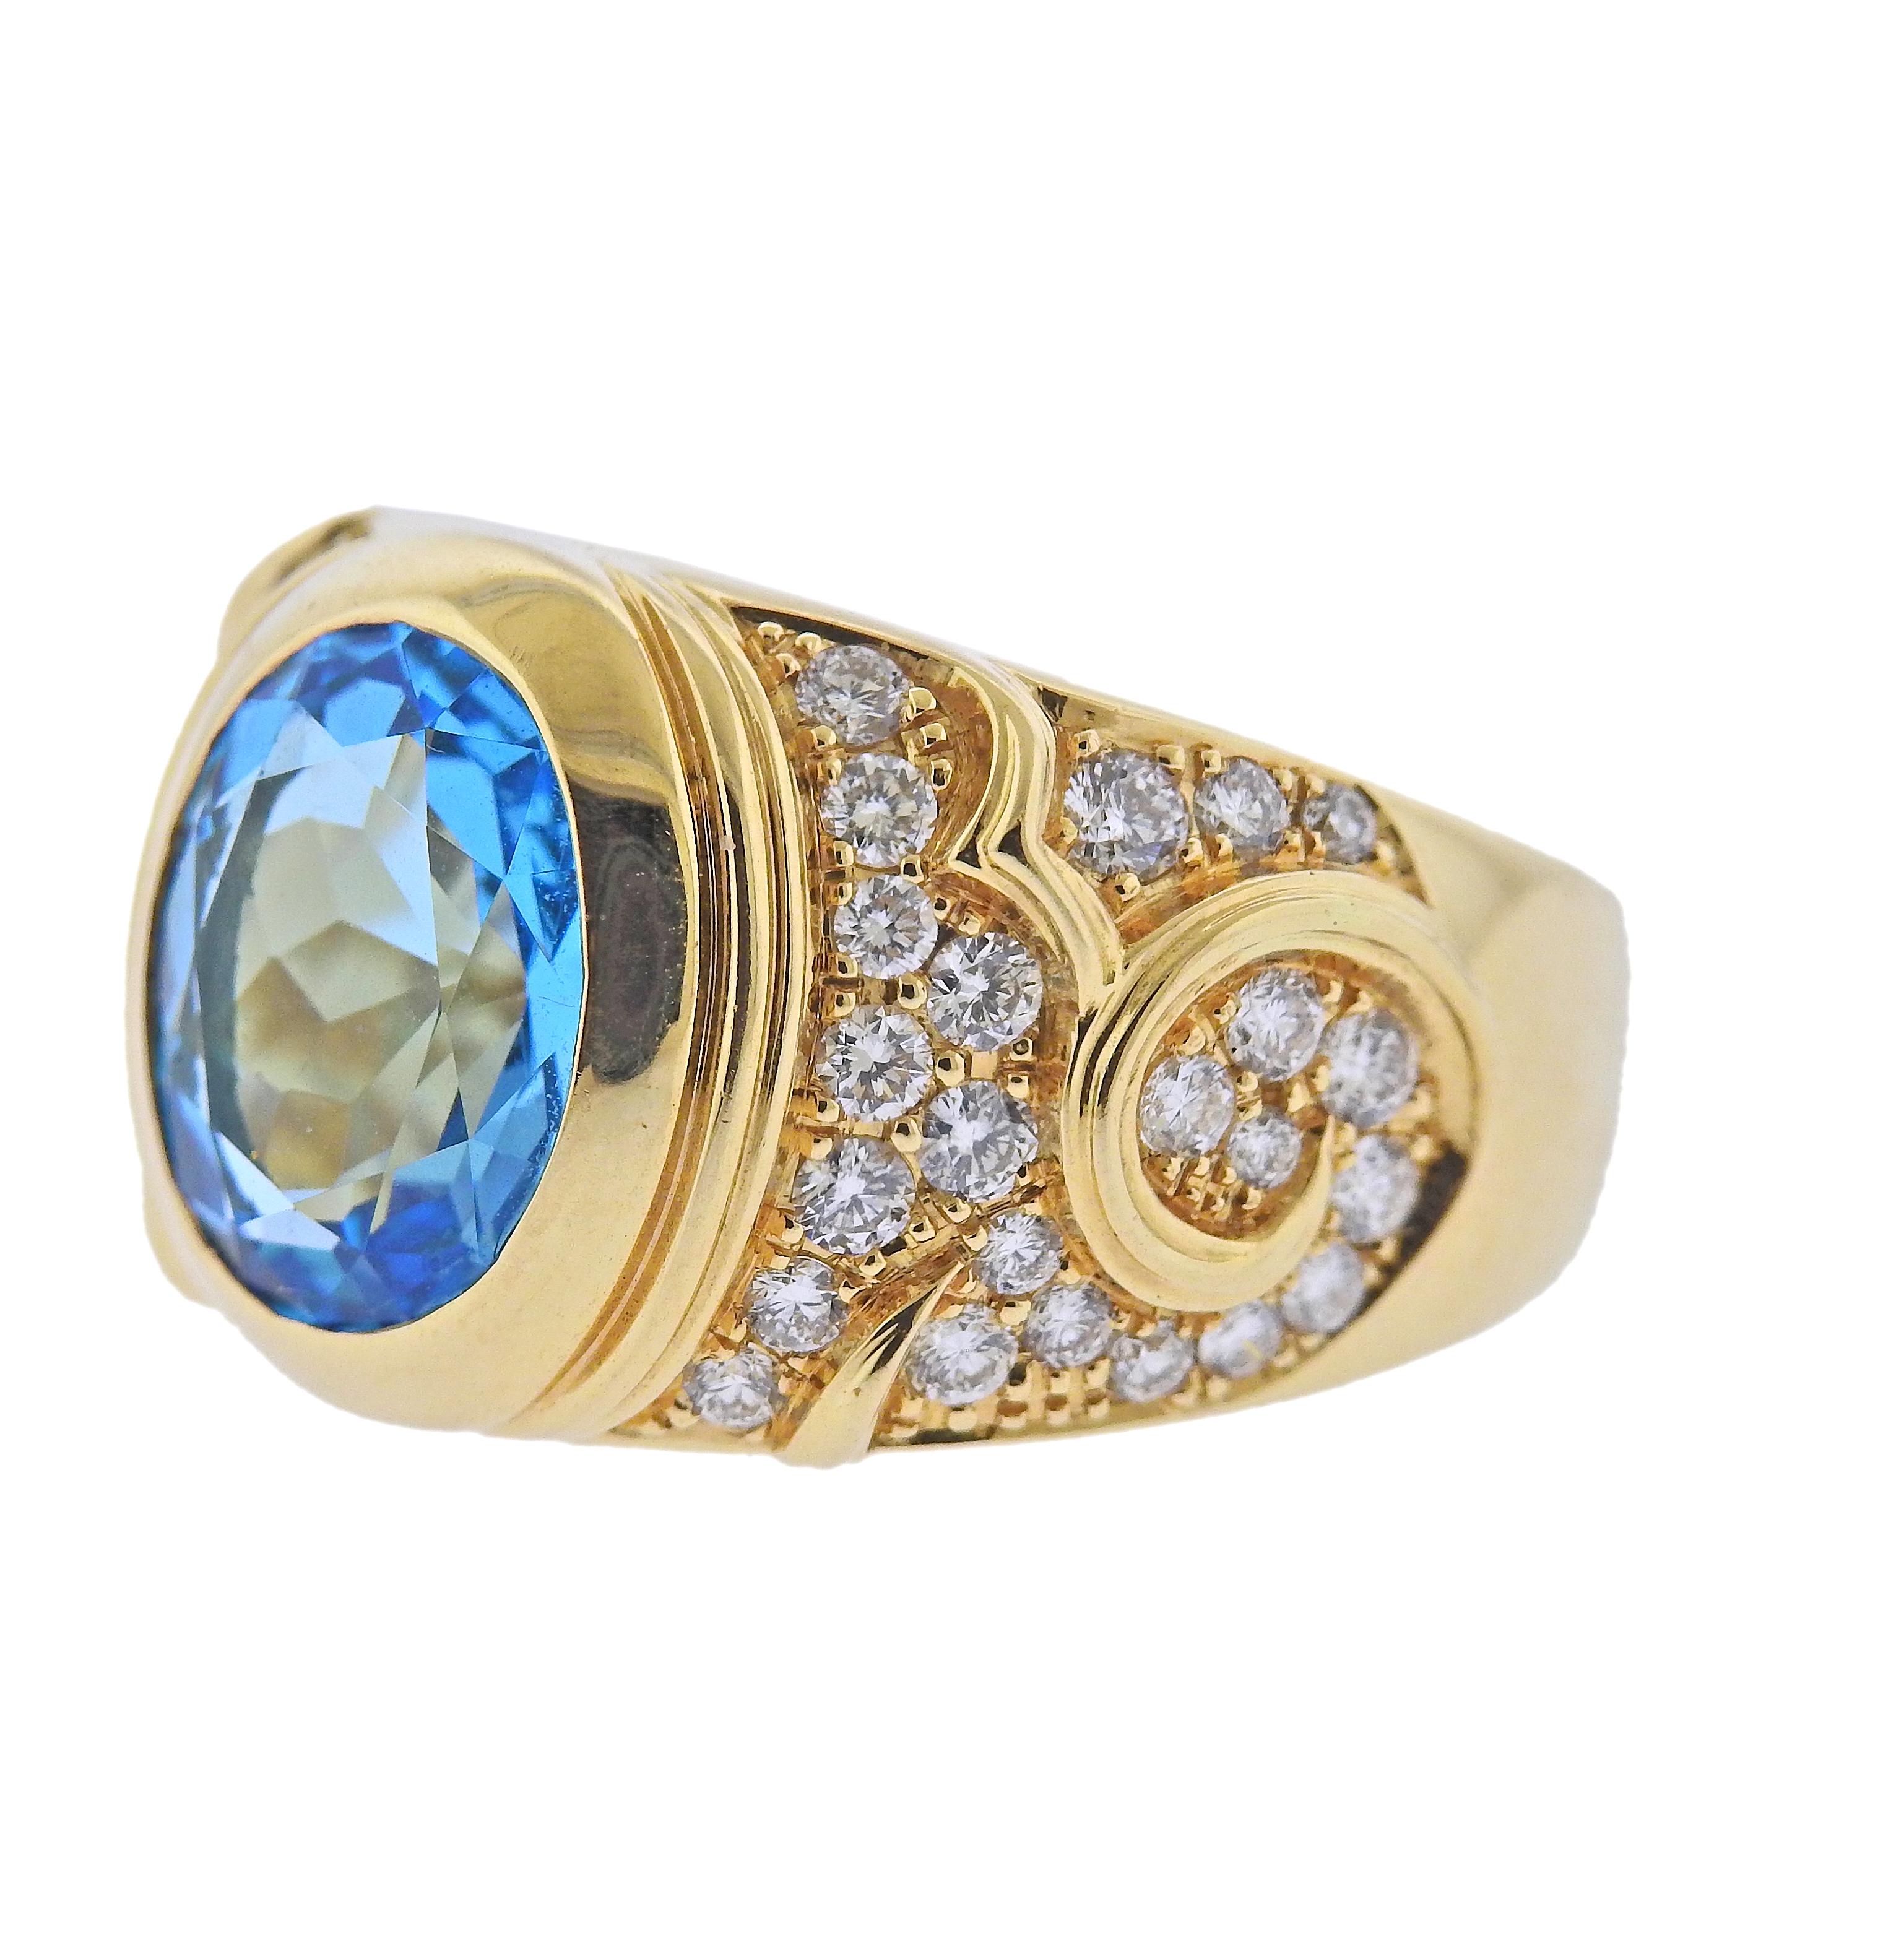 18k gold cuff ring by Marina B, with center approx. 3.70ct blue topaz, surrounded with approx. 1.20ctw in G/VS diamonds. Ring size 7, ring top is 15mm wide. Marked: Marina B, 750, 12004. Weight - 13 grams.